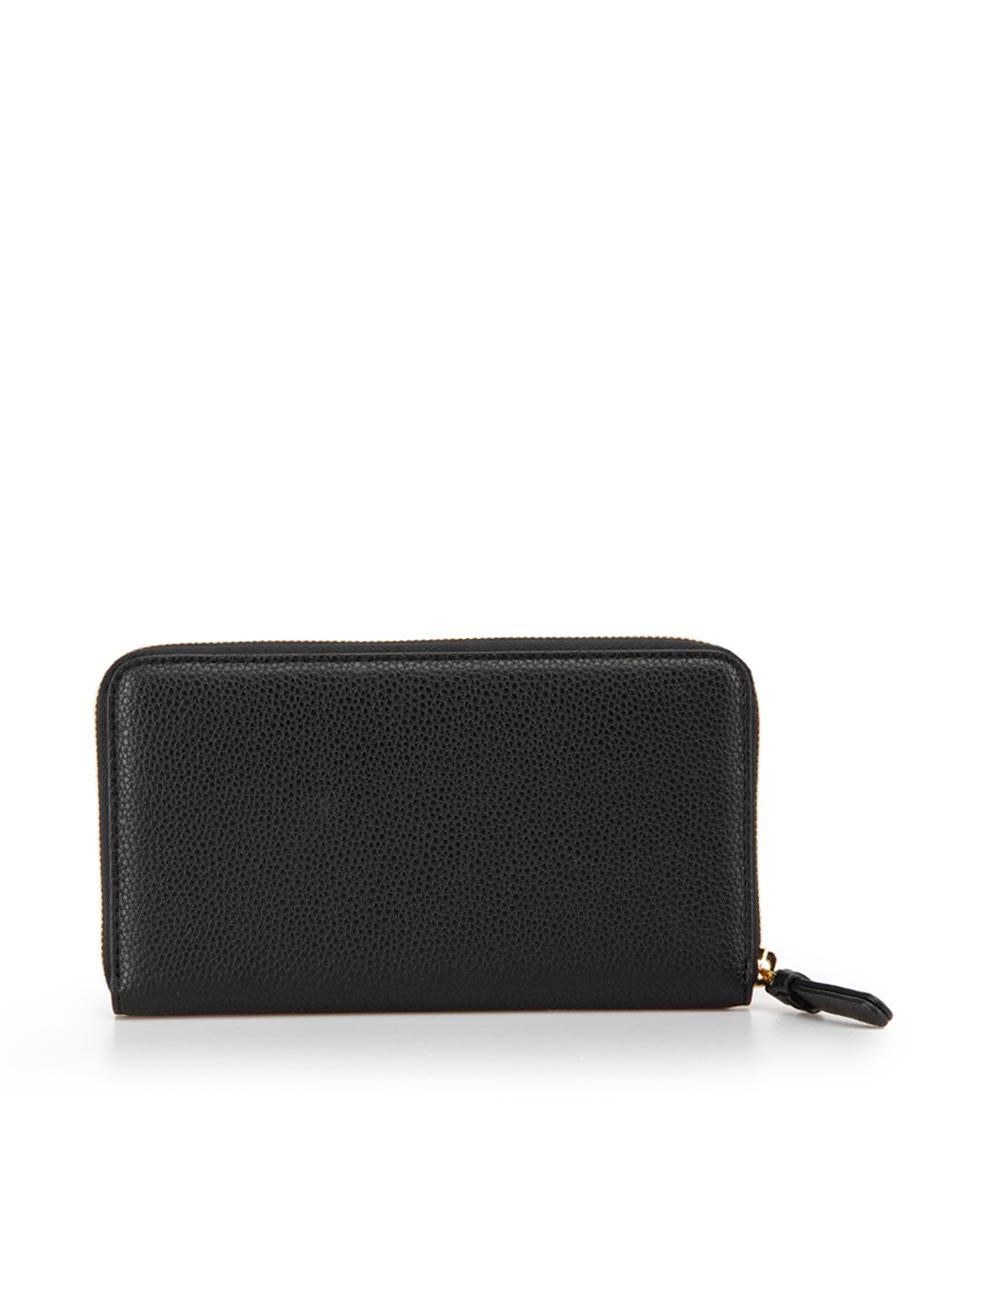 Emporio Armani Women's Black Leather Continental Wallet In Good Condition For Sale In London, GB